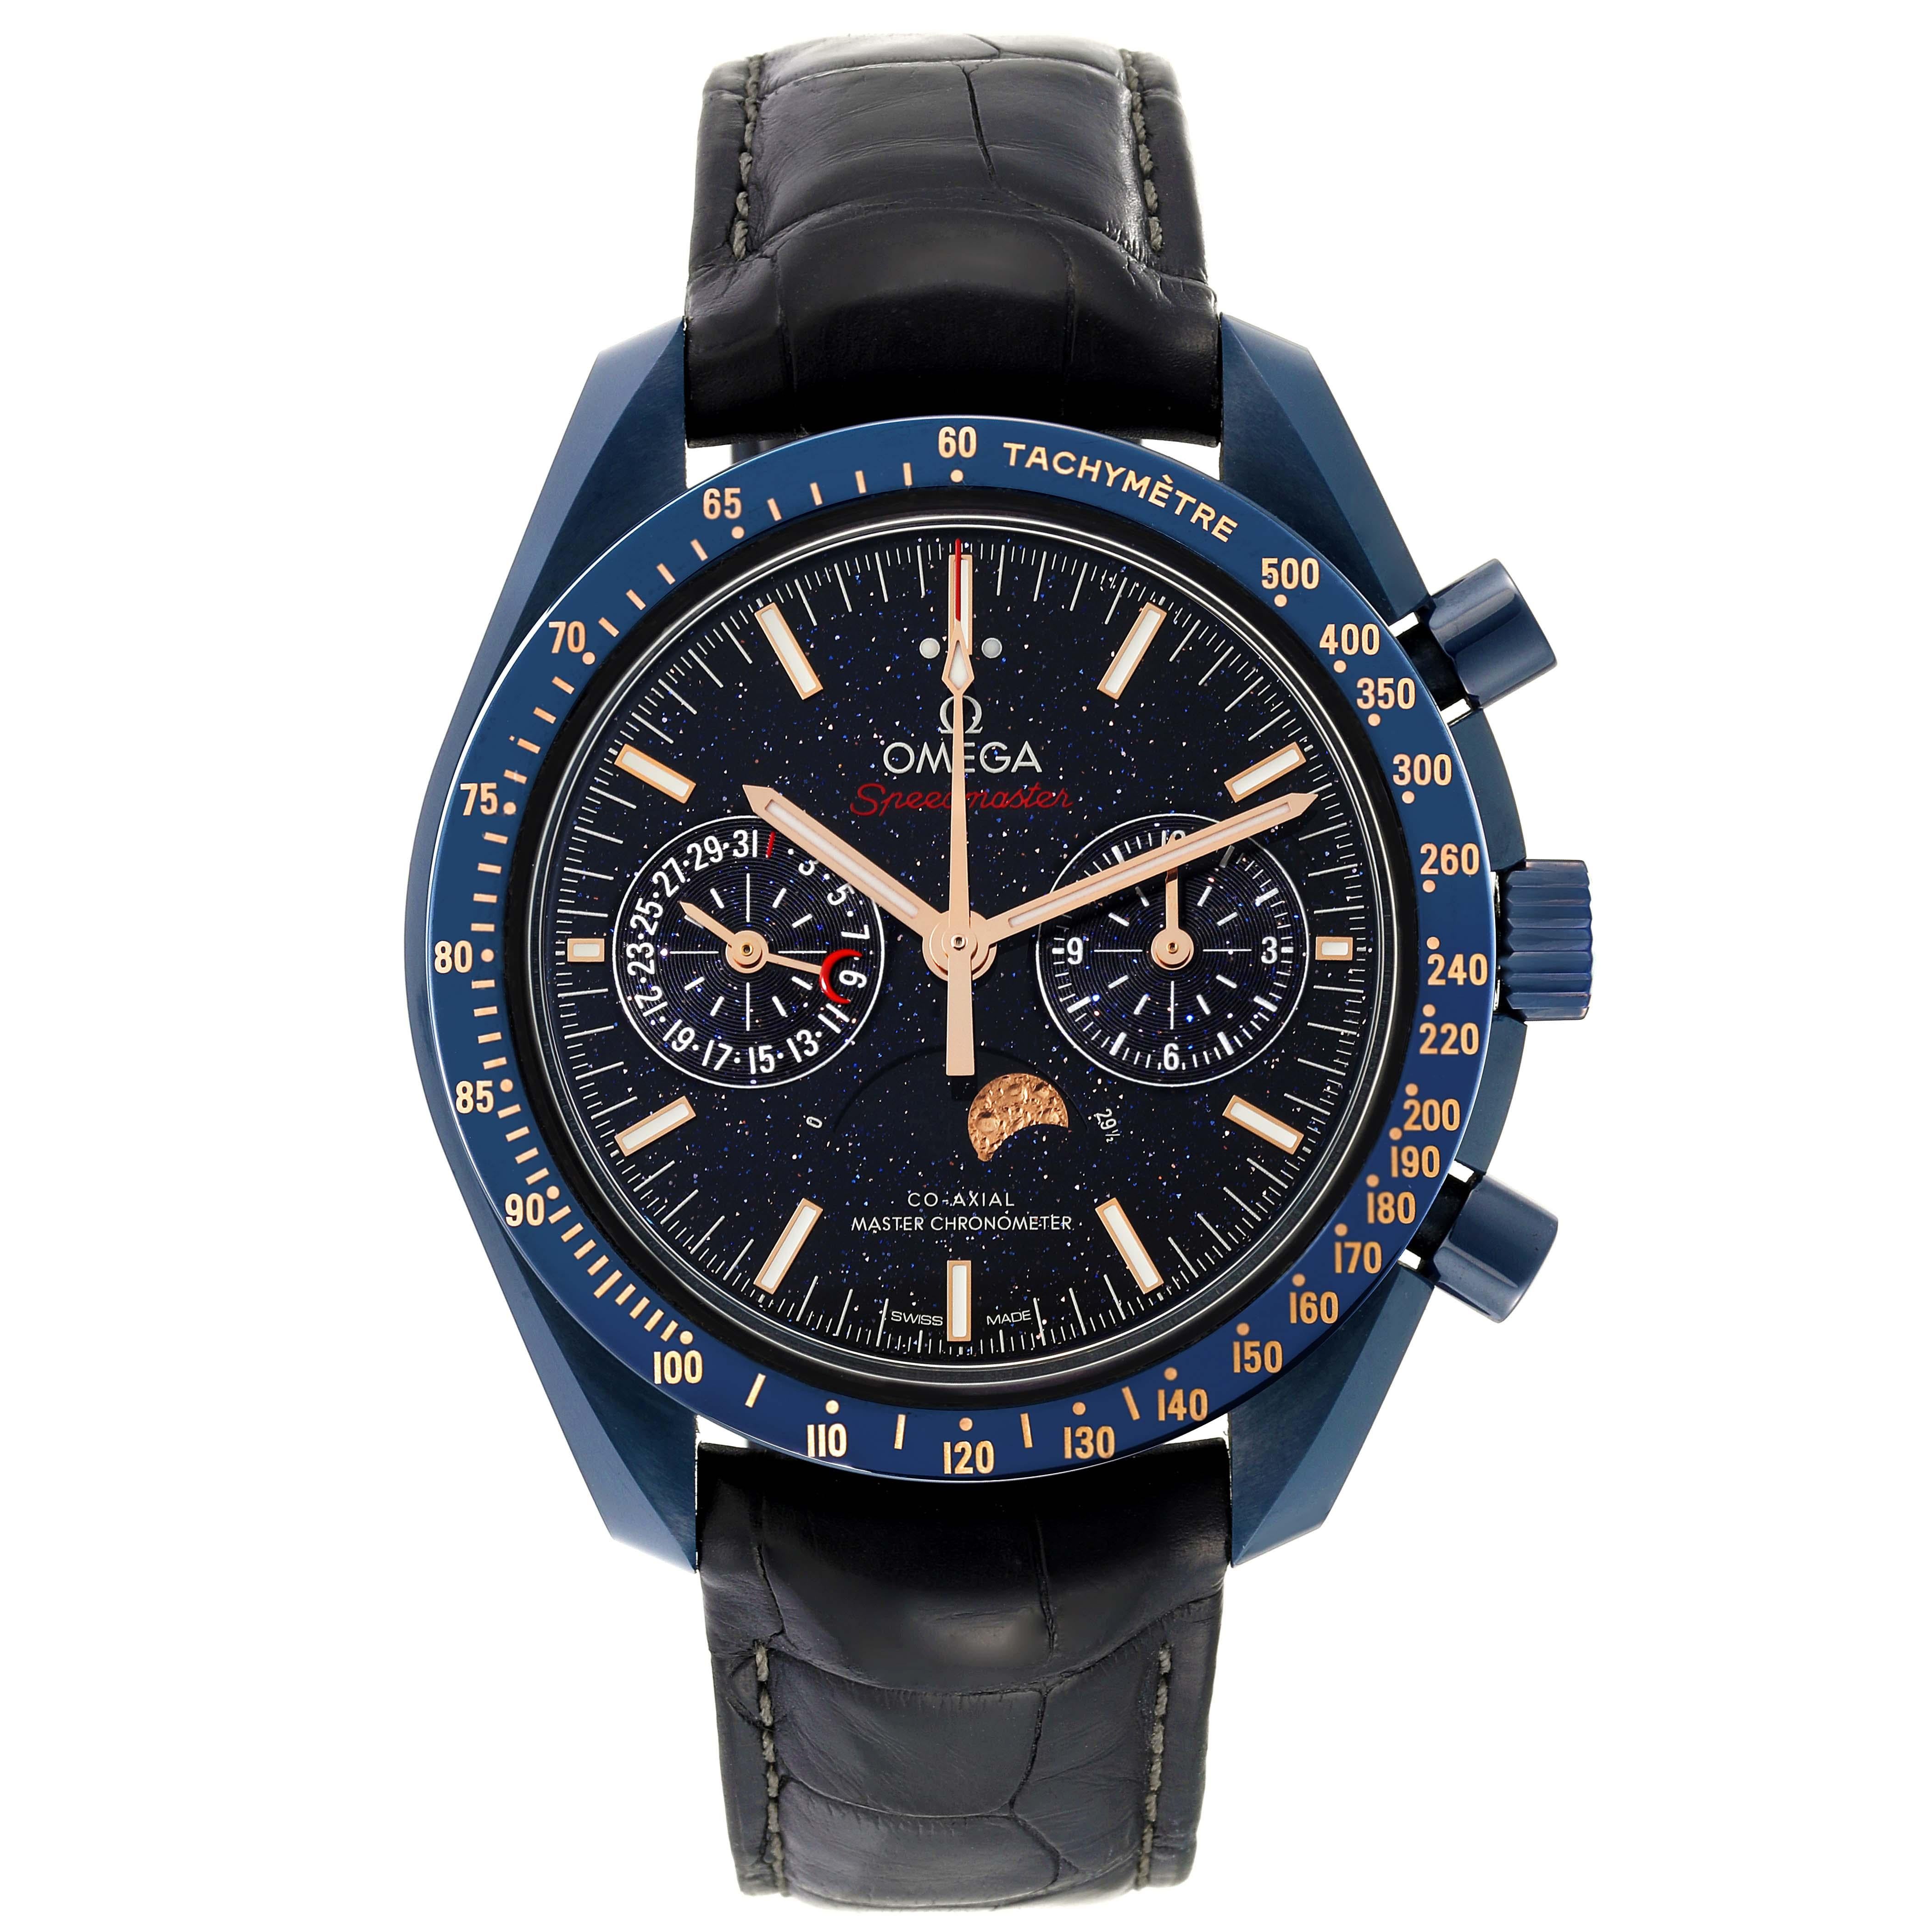 Omega Speedmaster Blue Side of the Moon Ceramic Mens Watch 304.93.44.52.03.002. Automatic self-winding chronograph movement with column wheel mechanism and Co-Axial Escapement. Silicon balance-spring on free sprung-balance, 2 barrels mounted in